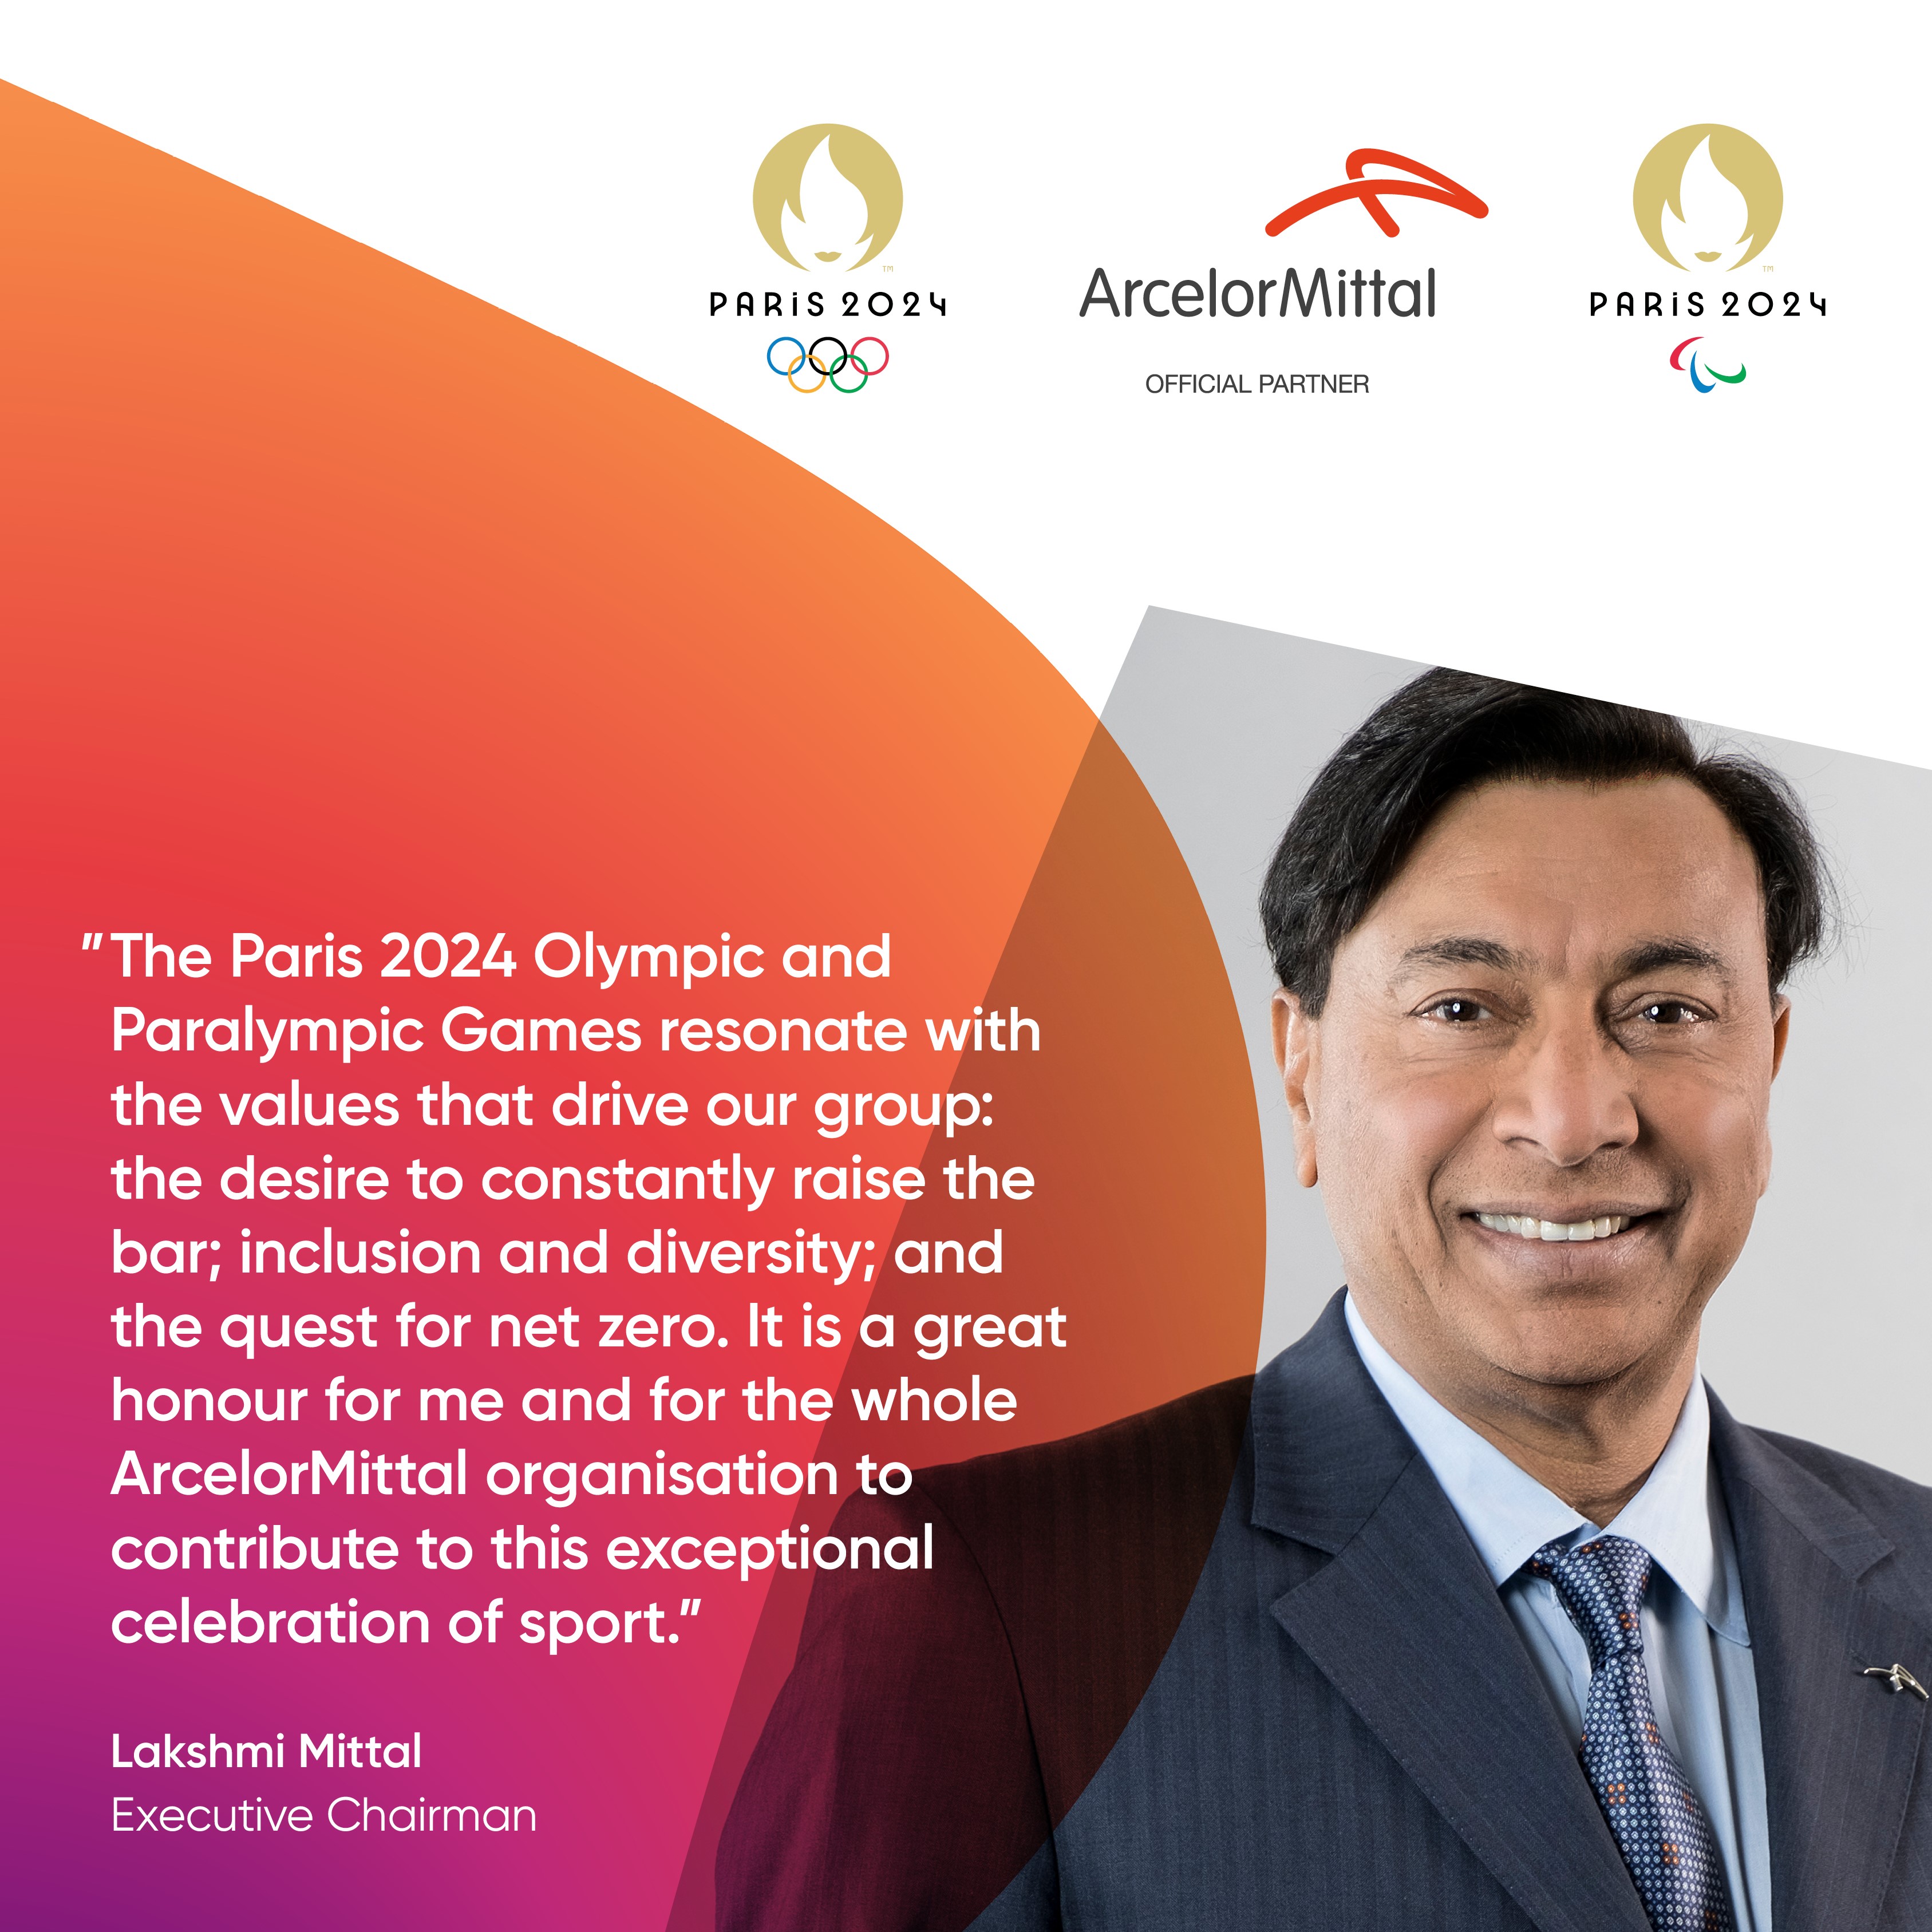 ArcelorMittal Official Partner of the Paris 2024 Olympic Games